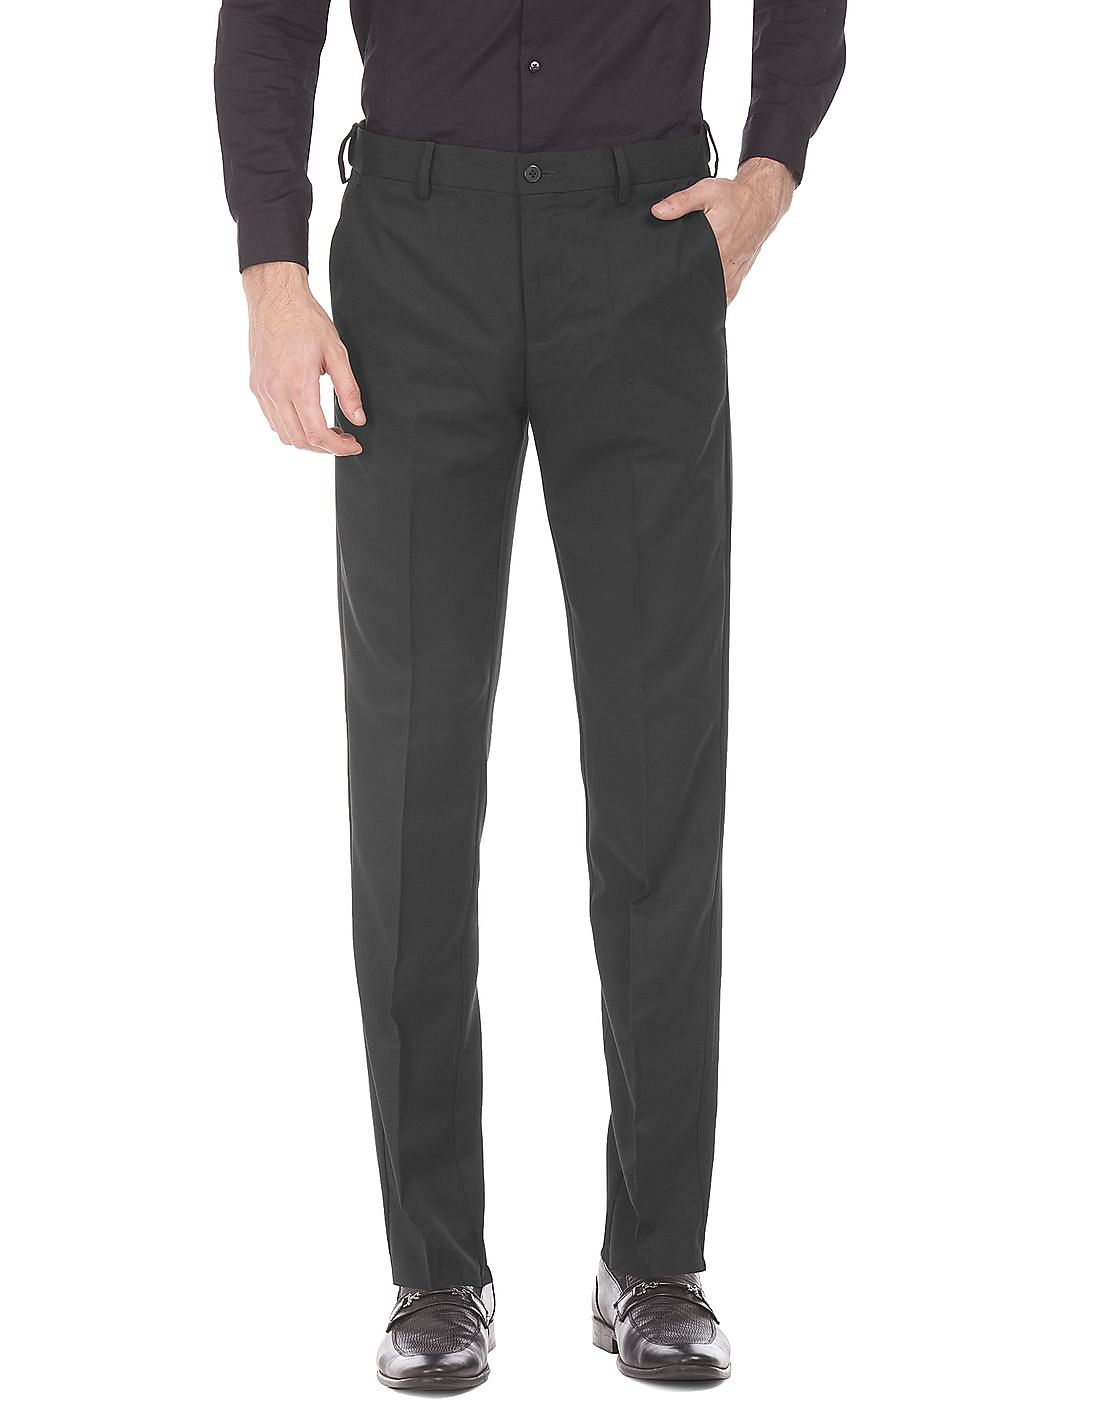 New Mens Black Pleated Adjustable Wool Tuxedo Pants by Broadway Tuxma   New Era Factory Outlet